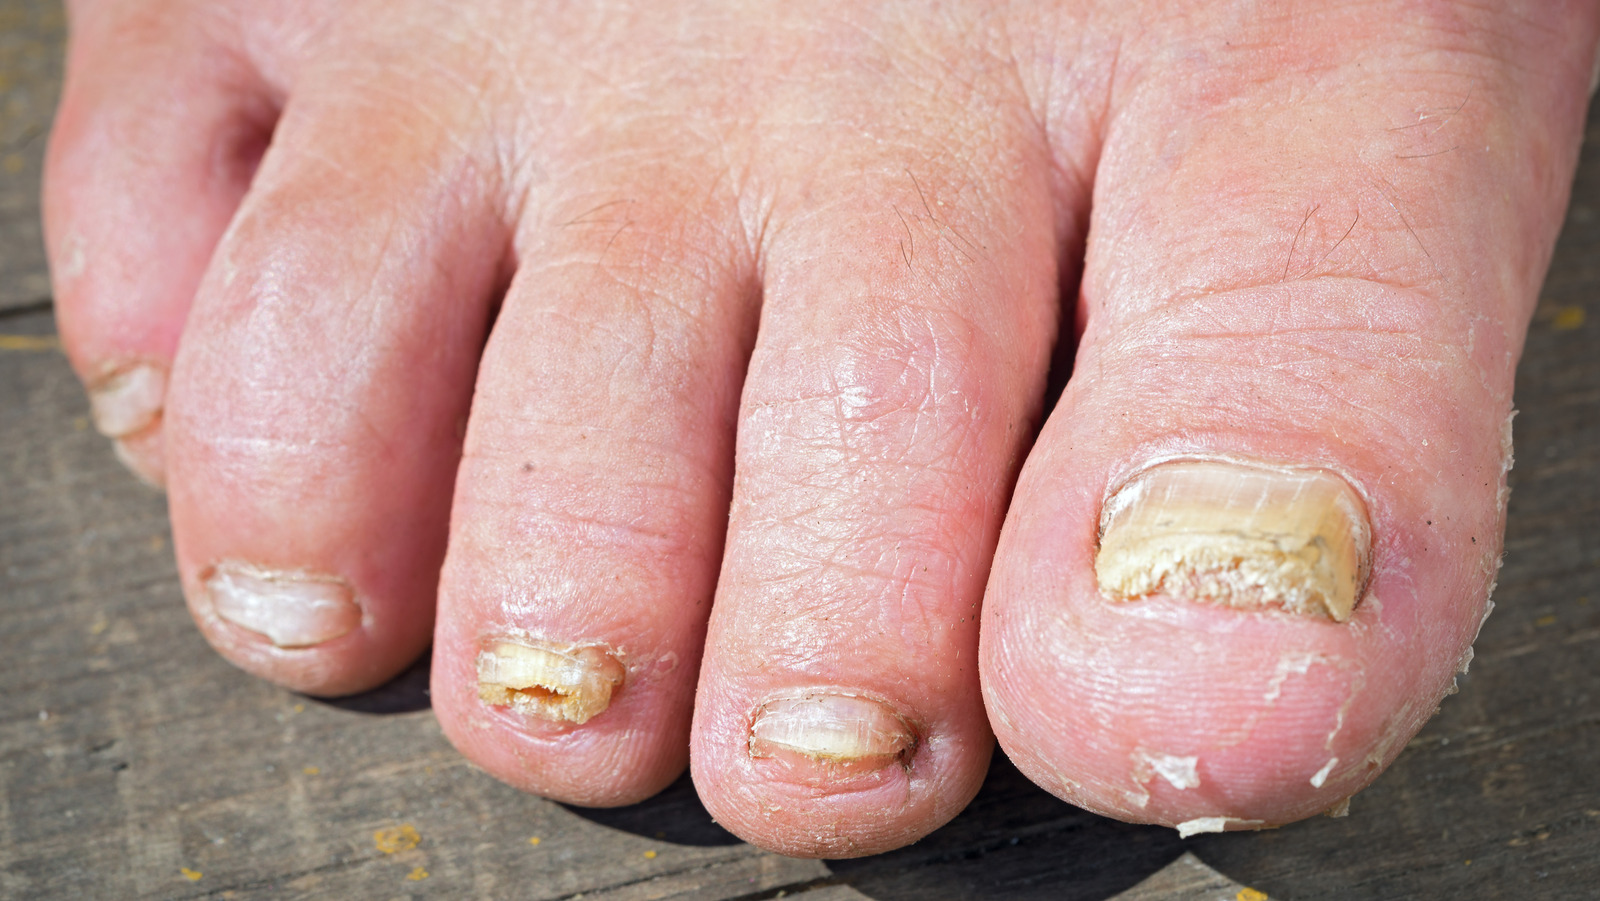 Nail Fungus: Causes, Symptoms, Treatments, And Prevention